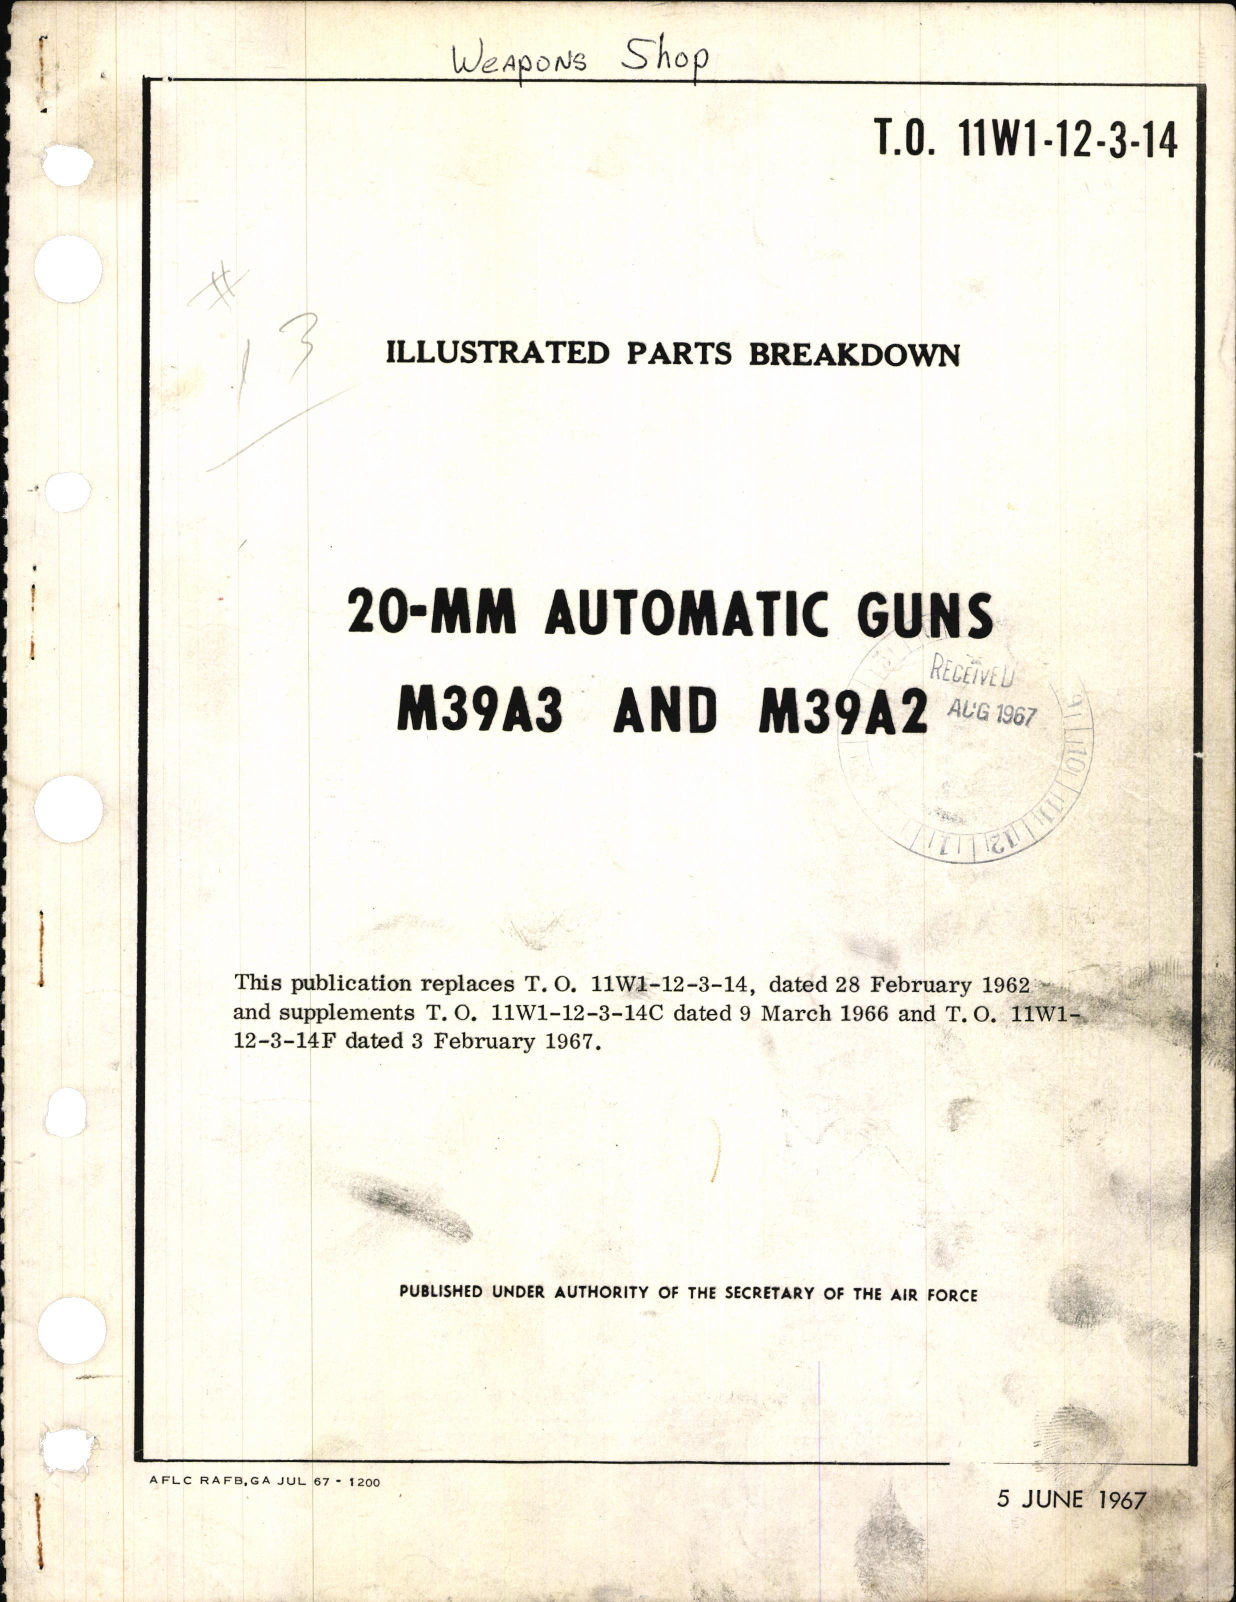 Sample page 1 from AirCorps Library document: Illustrated Parts Breakdown for 20-MM Automatic Guns M39A3 and M39A2